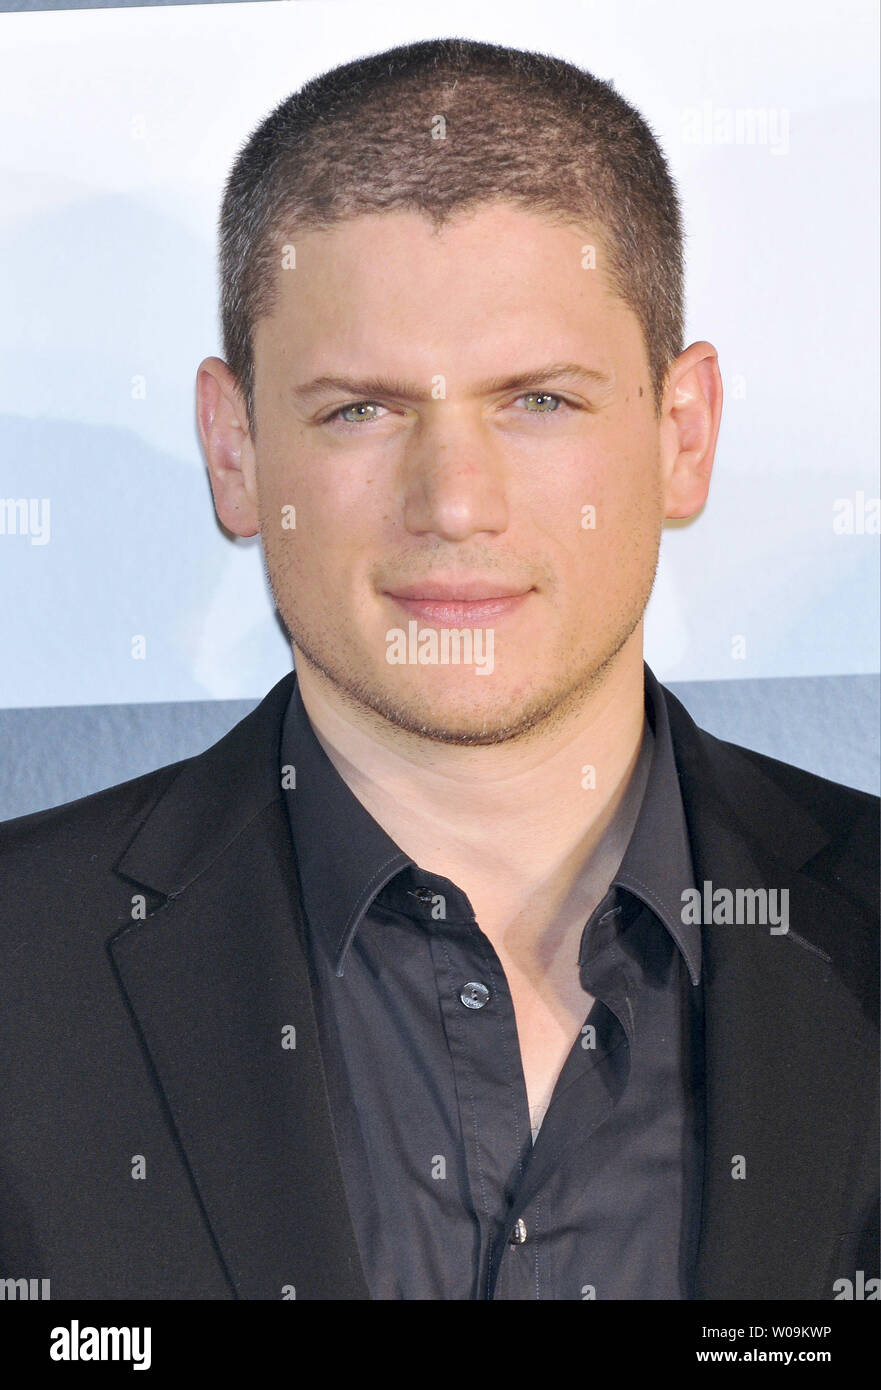 Actor Wentworth Miller attends the world premiere for the film 'Resident Evil: Afterlife' in Tokyo, Japan, on September 2, 2010.     UPI/Keizo Mori Stock Photo